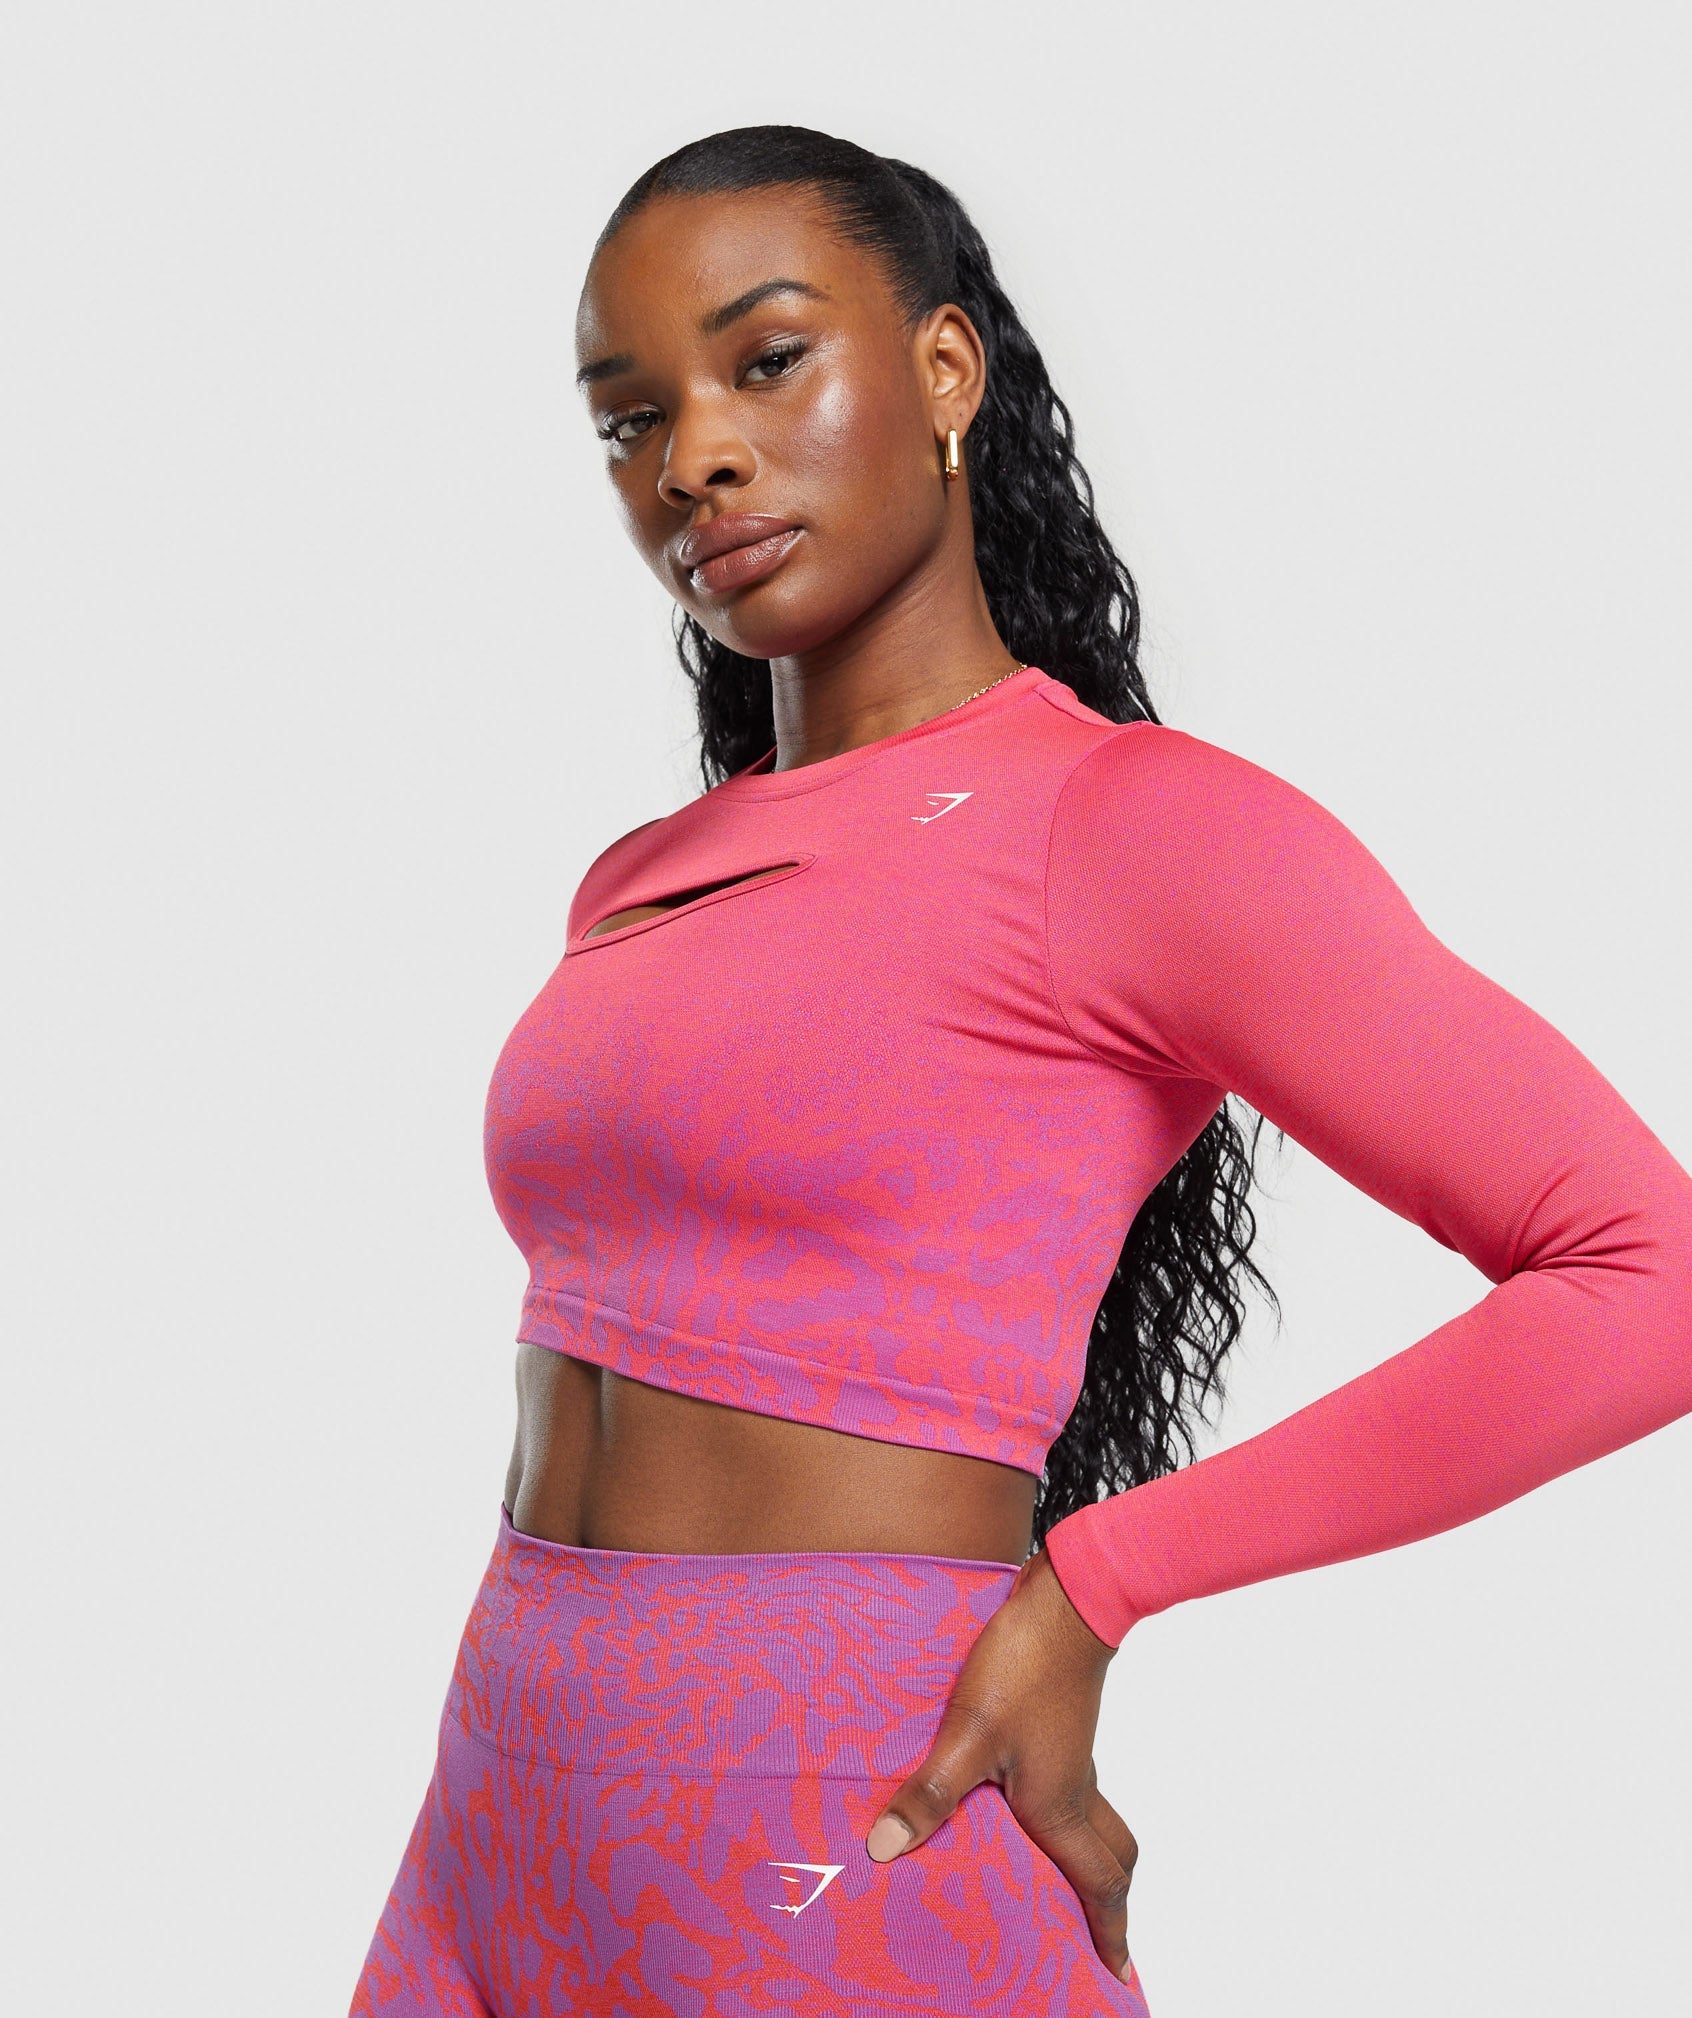 Adapt Safari Seamless Faded Long Sleeve Top in Shelly Pink/Fly Coral - view 7